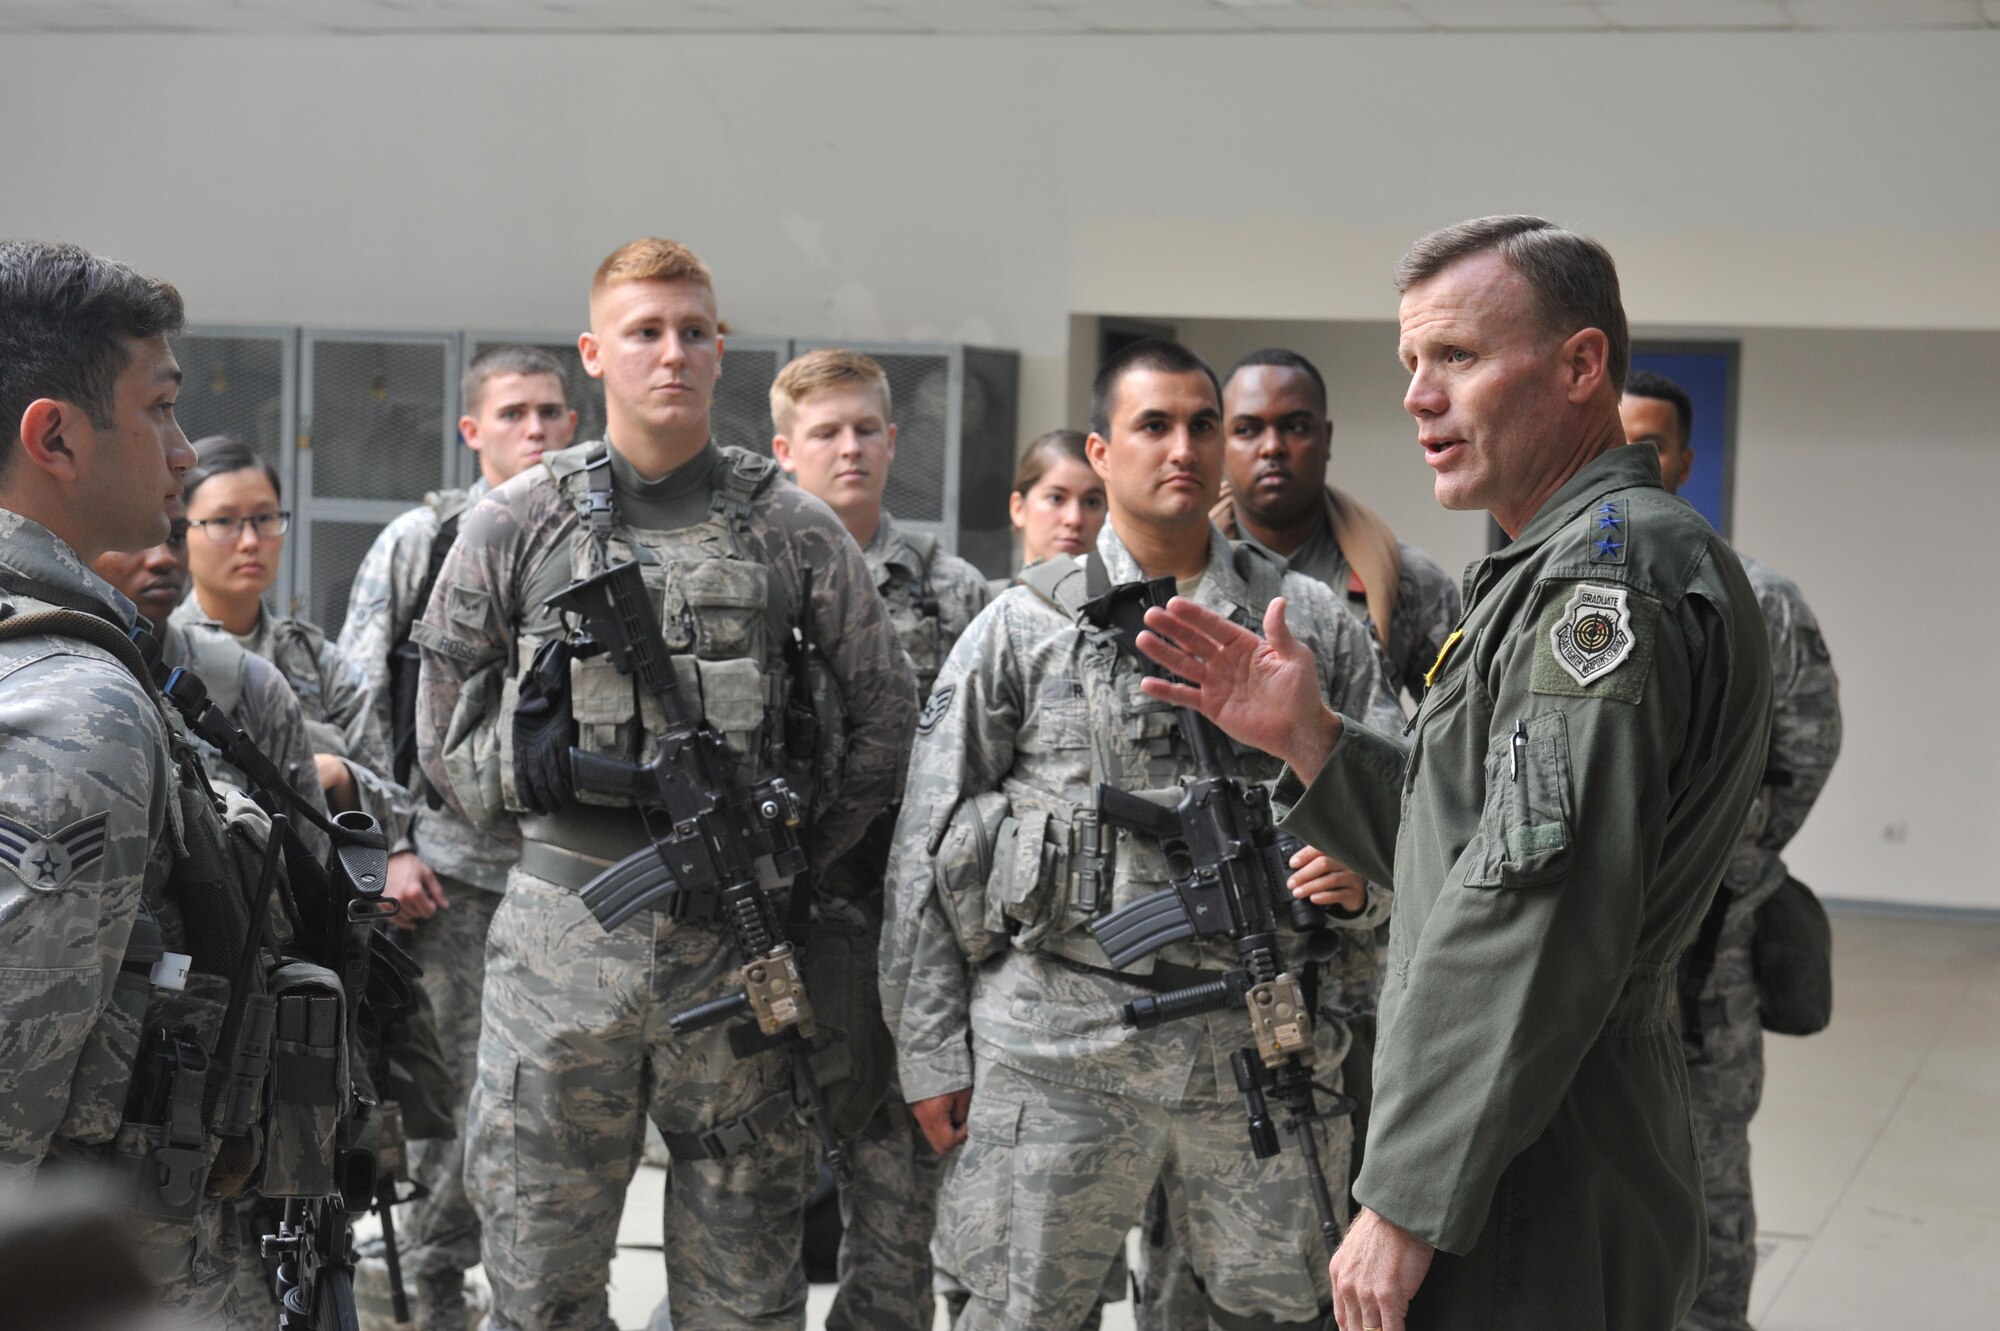 U.S. Air Force Gen. Tod D. Wolters, U.S. Air Forces in Europe and U.S. Air Forces Africa commander, speaks to members of the 39th Security Forces Squadron Aug. 31, 2016, at Incirlik Air Base, Turkey. Wolters visited Airmen across the base to meet and speak about the diverse and important missions the base is supporting. (U.S. Air Force photo by Tech. Sgt. Joshua T. Jasper)